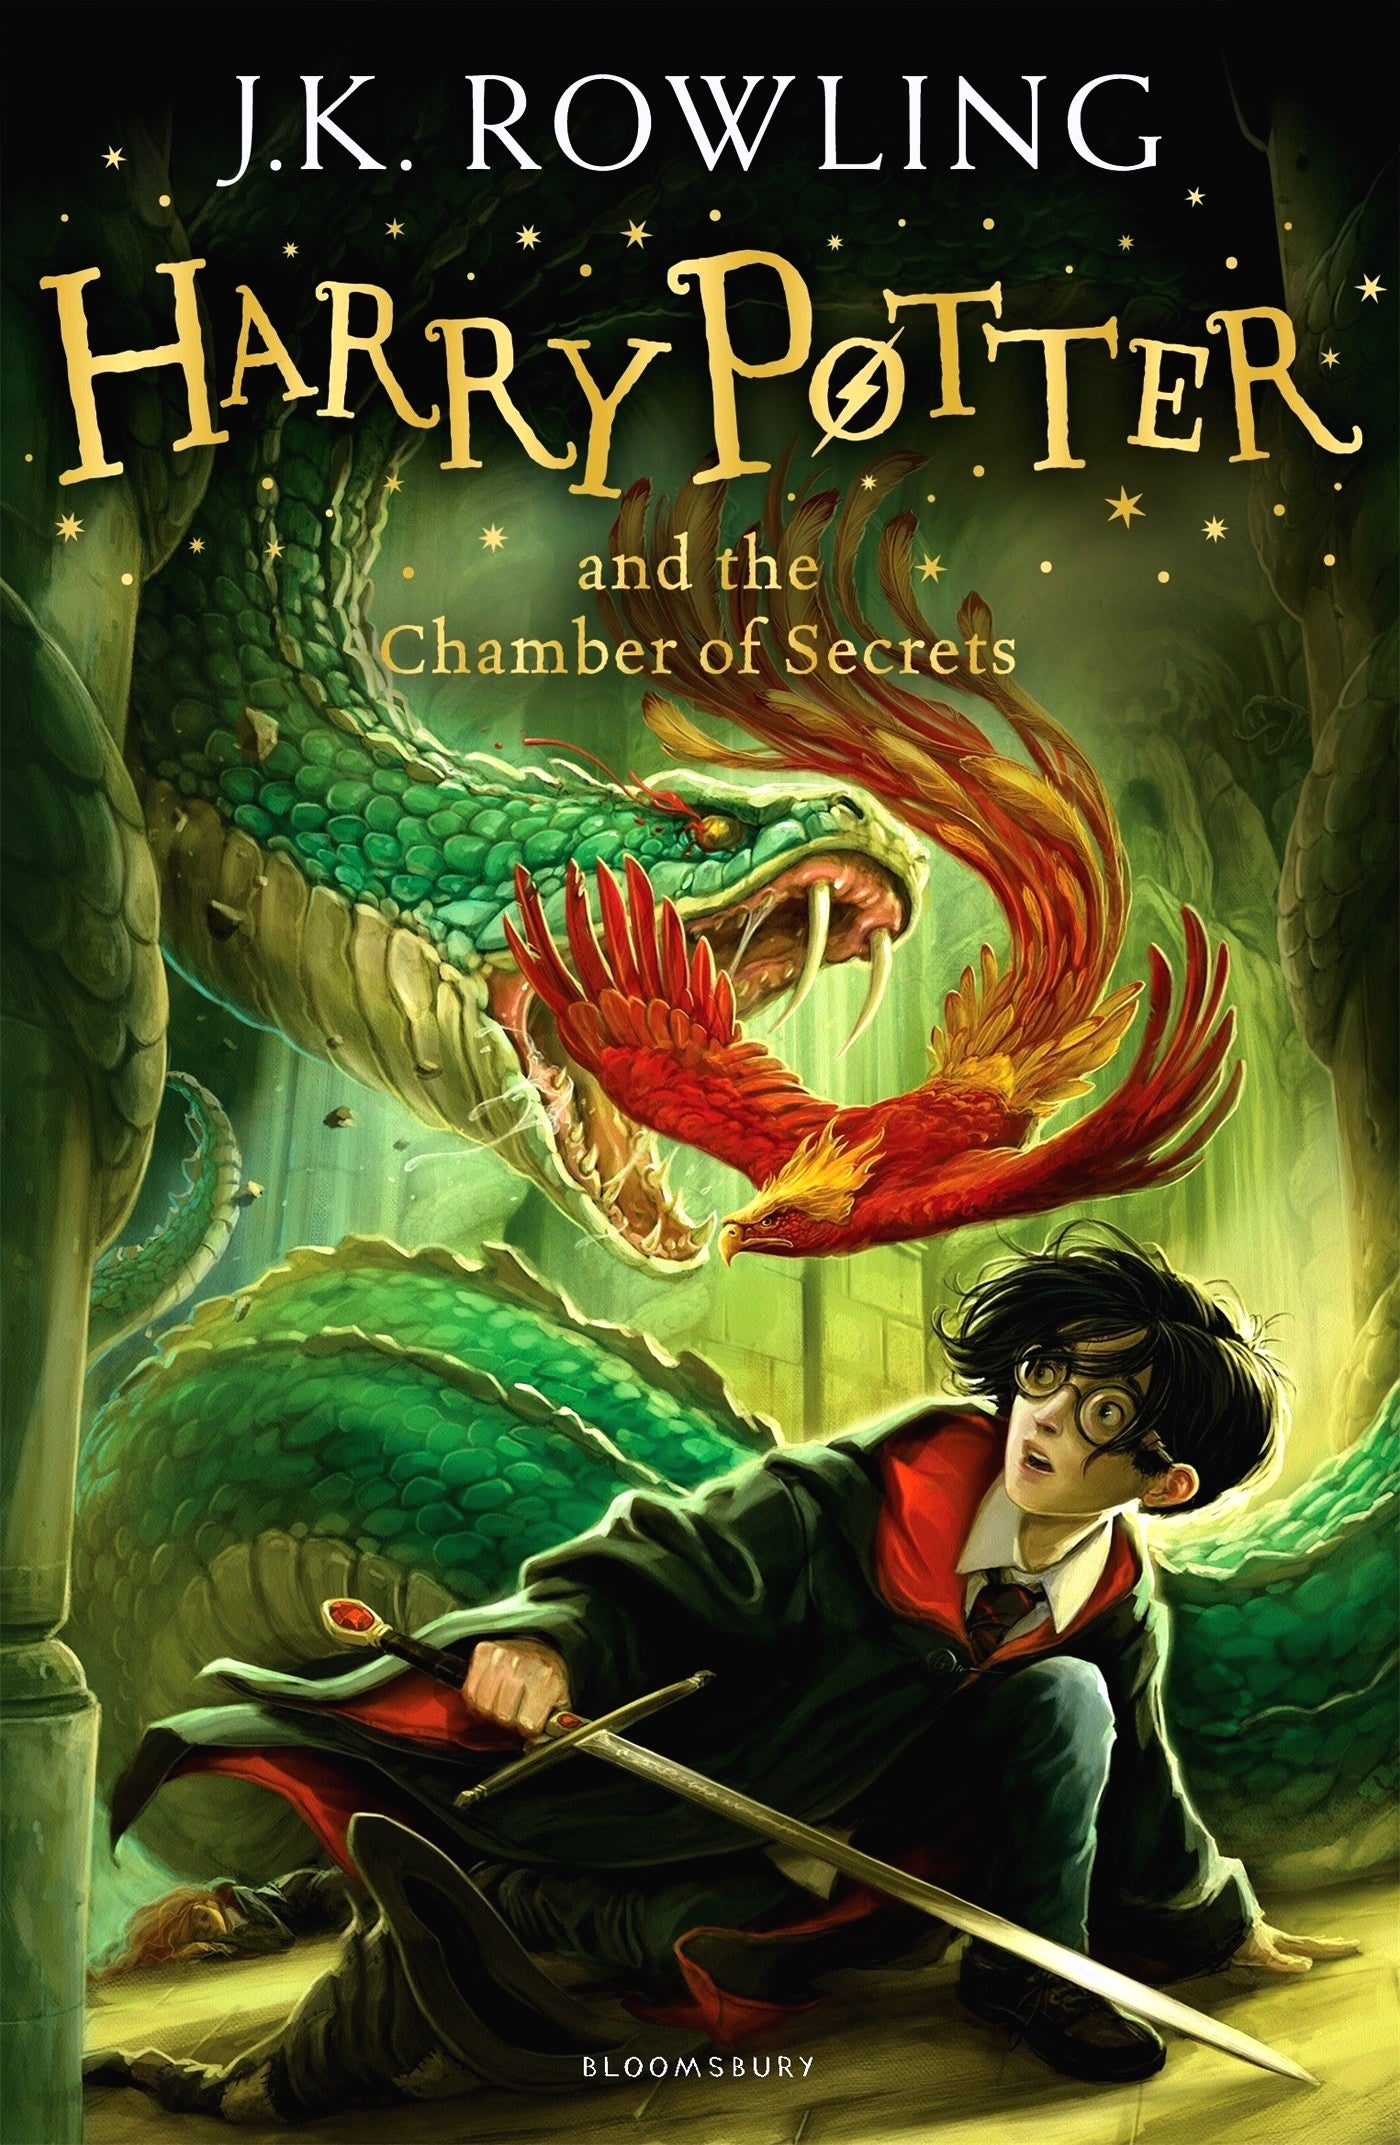 Harry Potter #2 Harry Potter and the Chamber of Secrets